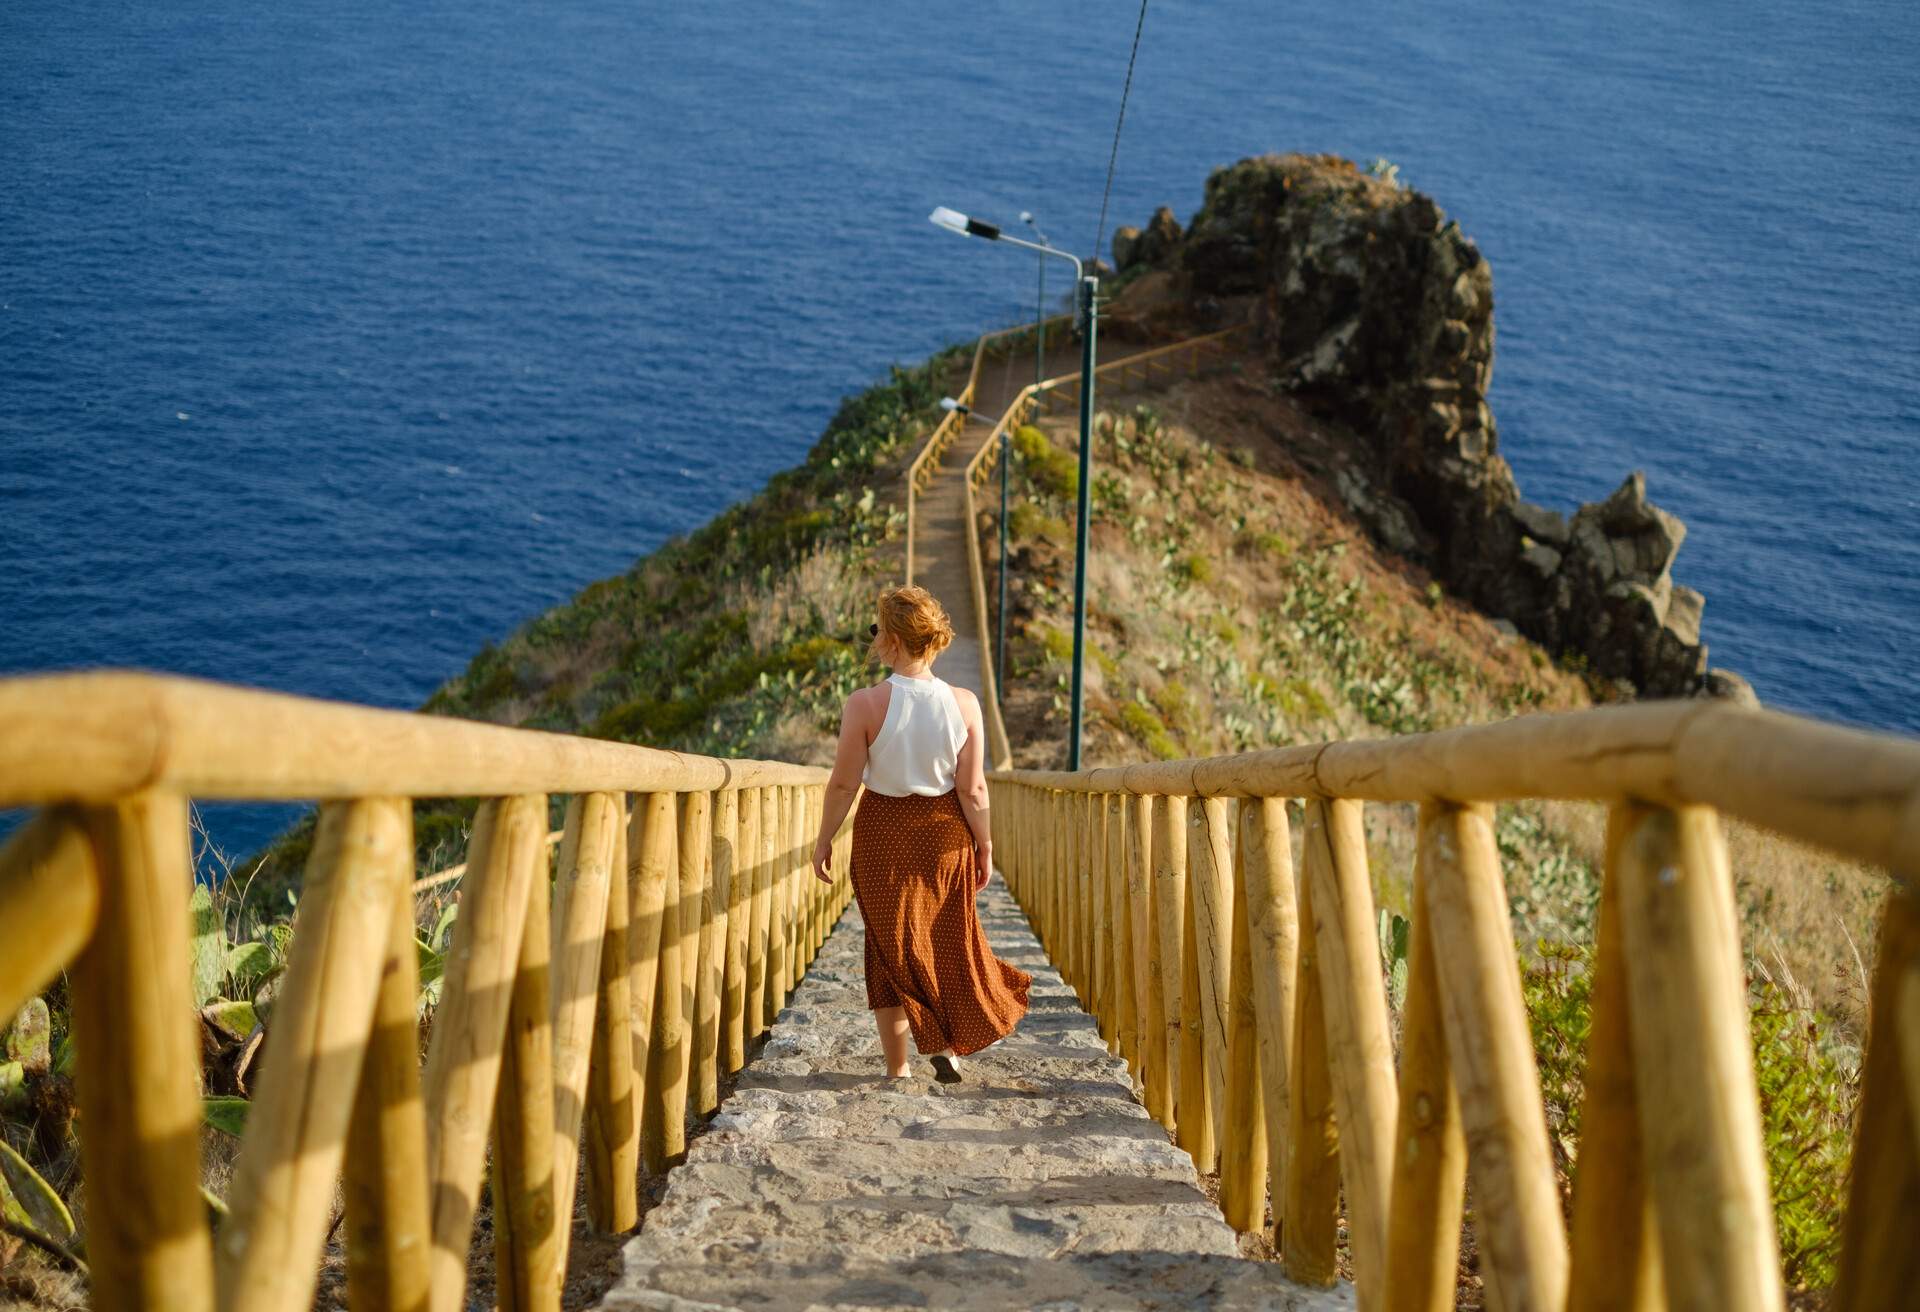 A person gracefully descends a stairway leading to a viewpoint overlooking the sea.